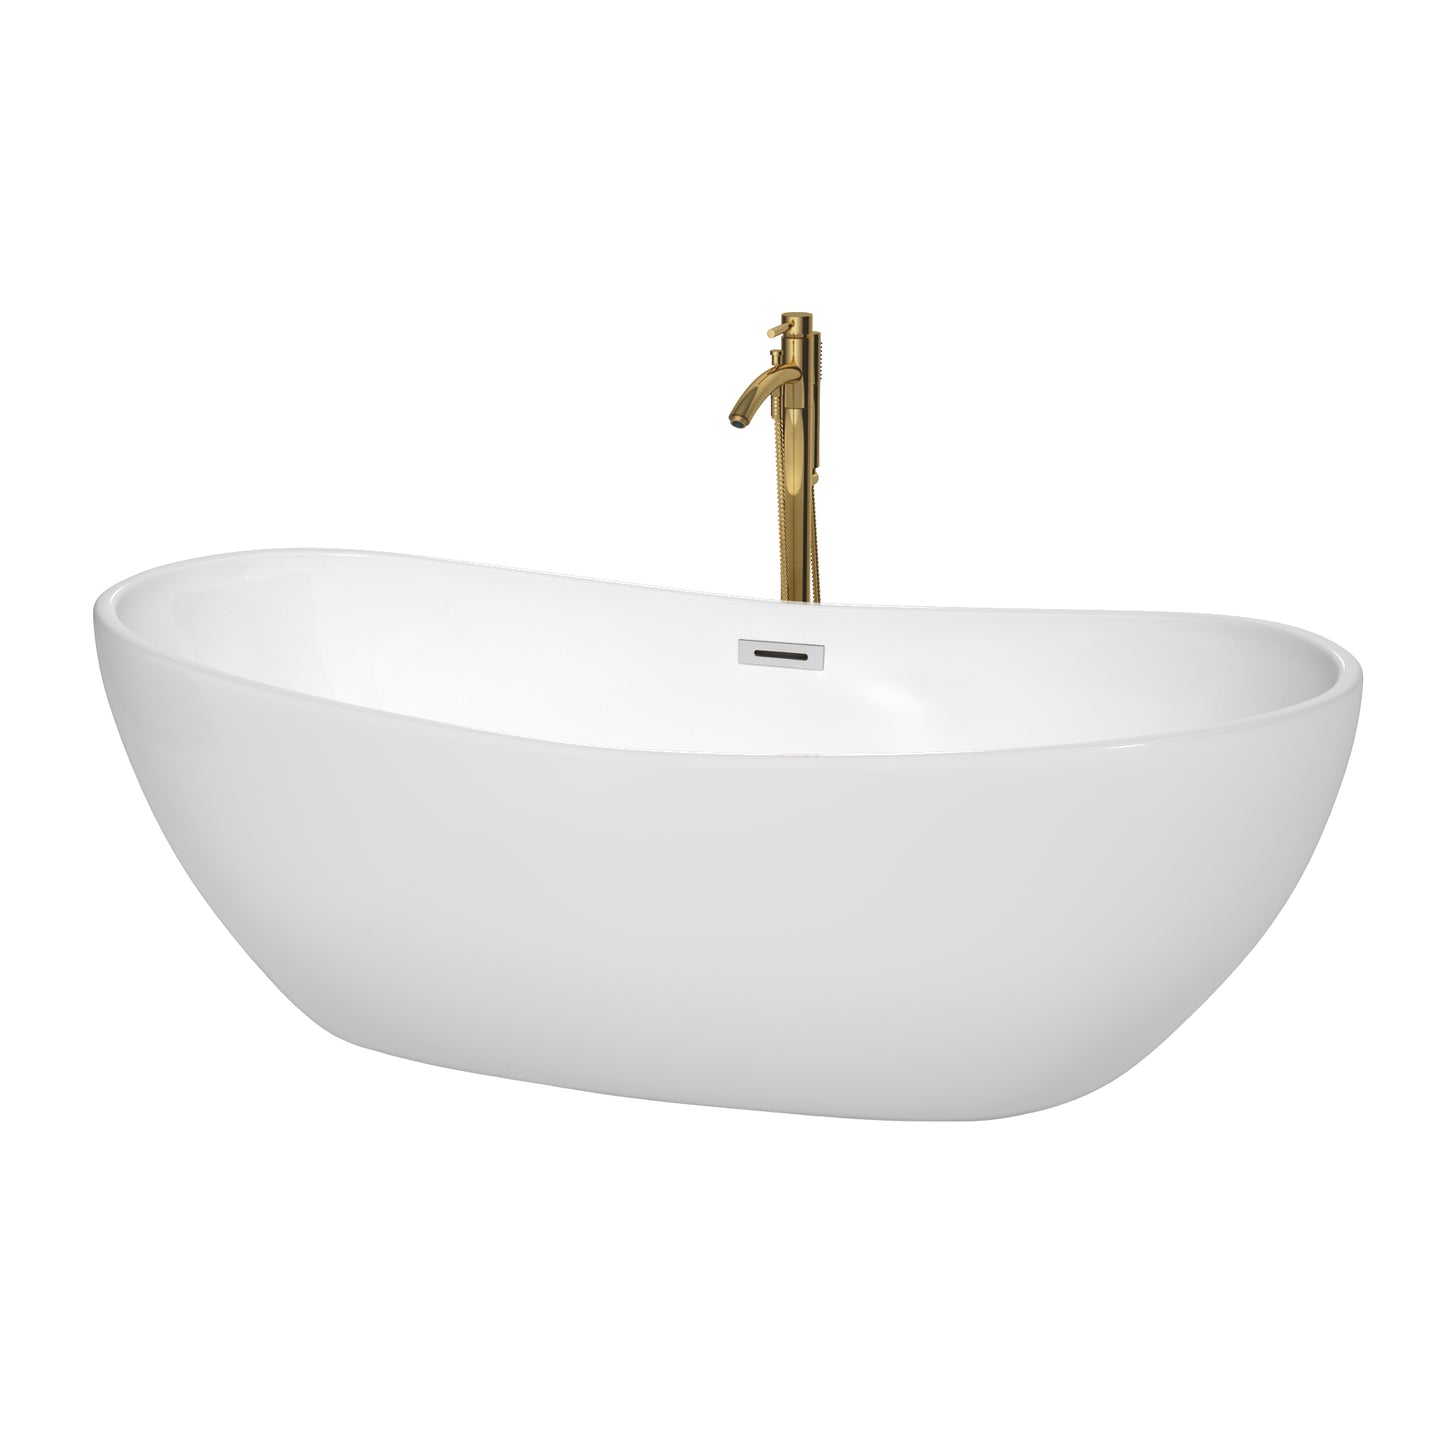 Wyndham Collection Rebecca 70 Inch Freestanding Bathtub in White with Floor Mounted Faucet, Drain and Overflow Trim - Luxe Bathroom Vanities